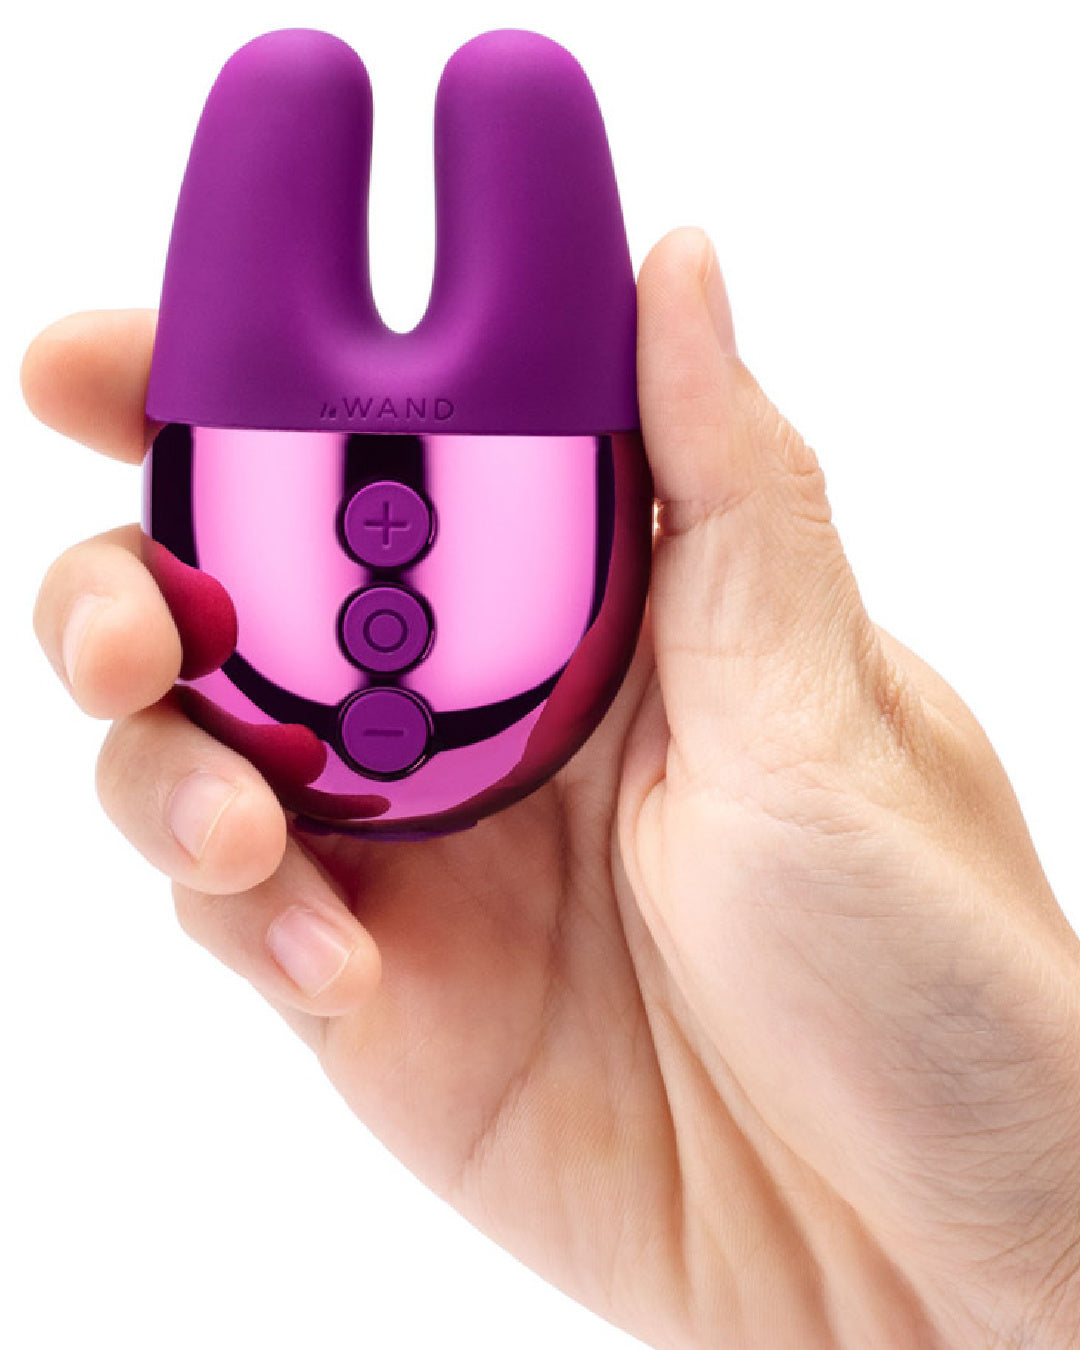 Le Wand Chrome Double Vibrator - Purple held in model's hand 